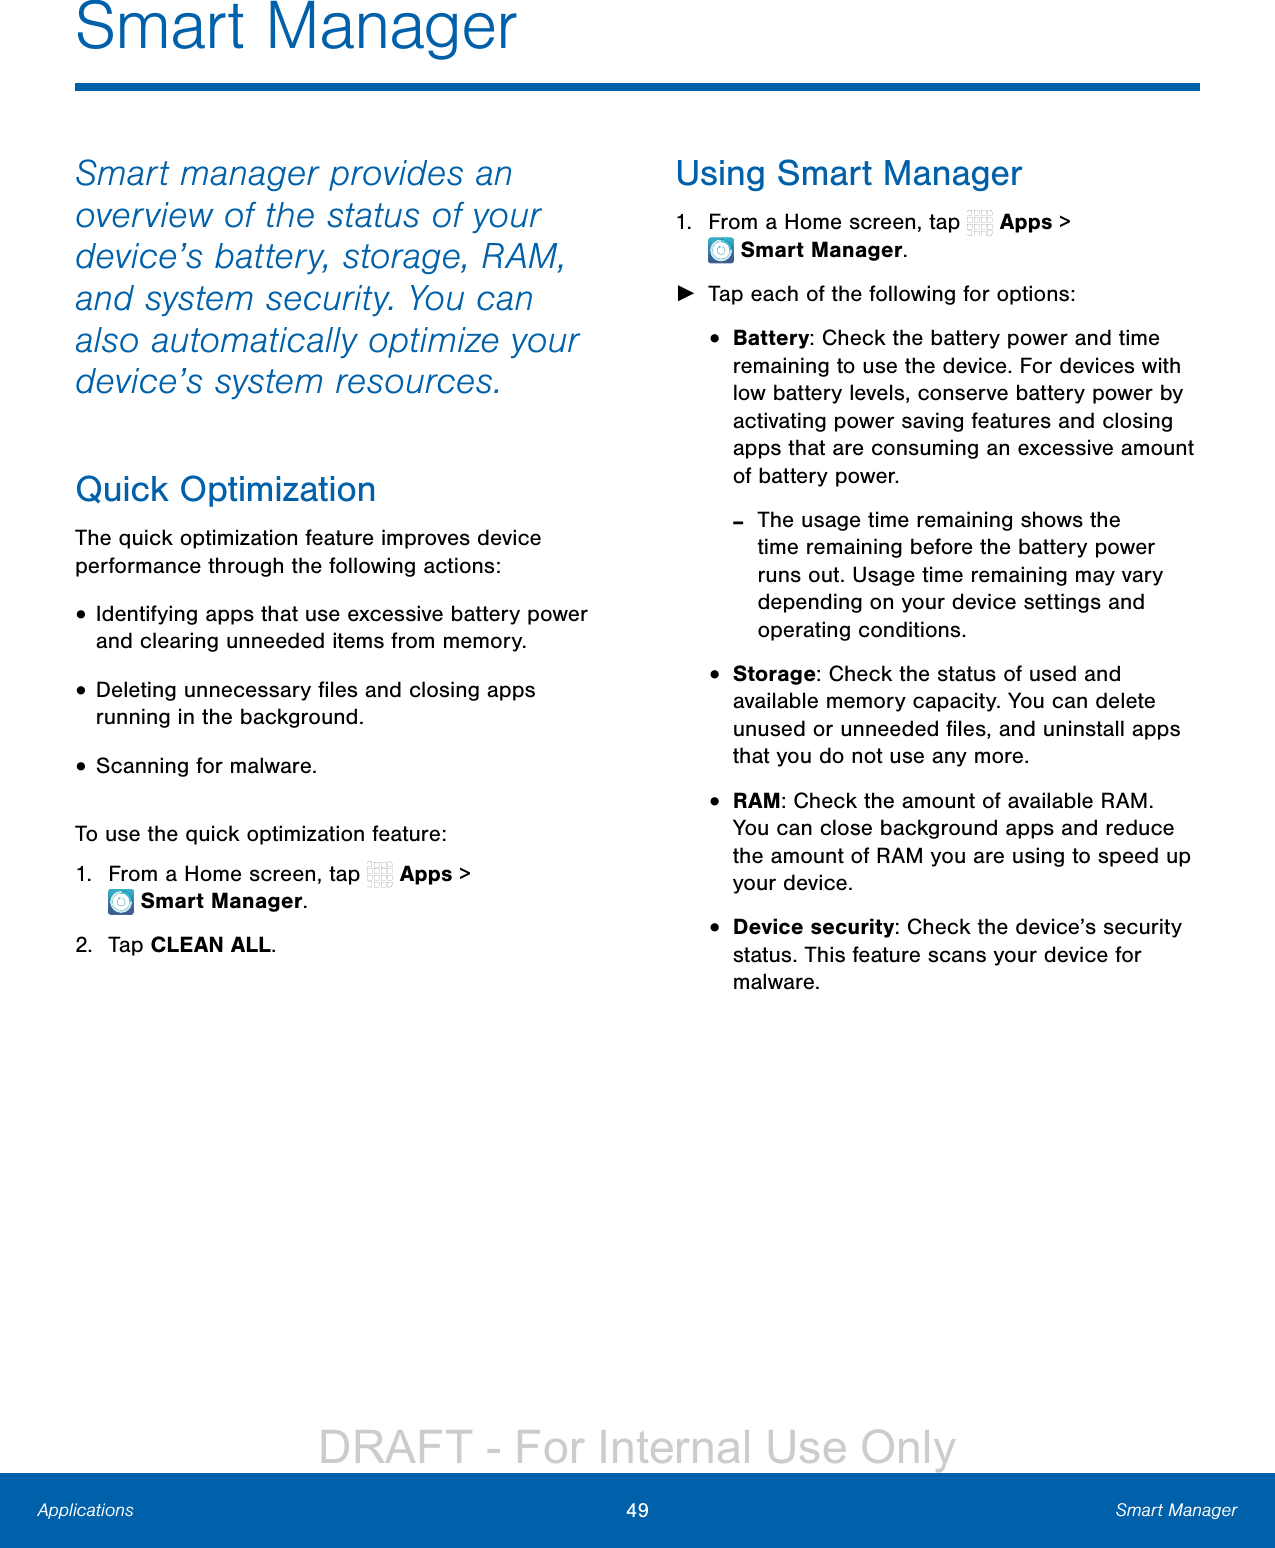 49 Smart ManagerApplicationsSmart ManagerSmart manager provides an overview of the status of your device’s battery, storage, RAM, and system security. You can also automatically optimize your device’s system resources.Quick OptimizationThe quick optimization feature improves device performance through the following actions:• Identifying apps that use excessive battery power and clearing unneeded items from memory.• Deleting unnecessary ﬁles and closing apps running in the background.• Scanning for malware.To use the quick optimization feature:1.  From a Home screen, tap   Apps &gt; SmartManager.2.  Tap CLEAN ALL.Using Smart Manager1.  From a Home screen, tap   Apps &gt; SmartManager. ►Tap each of the following for options:•  Battery: Check the battery power and time remaining to use the device. For devices with low battery levels, conserve battery power by activating power saving features and closing apps that are consuming an excessive amount of battery power. -The usage time remaining shows the time remaining before the battery power runs out. Usage time remaining may vary depending on your device settings and operating conditions.•  Storage: Check the status of used and available memory capacity. You can delete unused or unneeded ﬁles, and uninstall apps that you do not use any more.•  RAM: Check the amount of available RAM. You can close background apps and reduce the amount of RAM you are using to speed up your device.•  Device security: Check the device’s security status. This feature scans your device for malware.DRAFT - For Internal Use Only